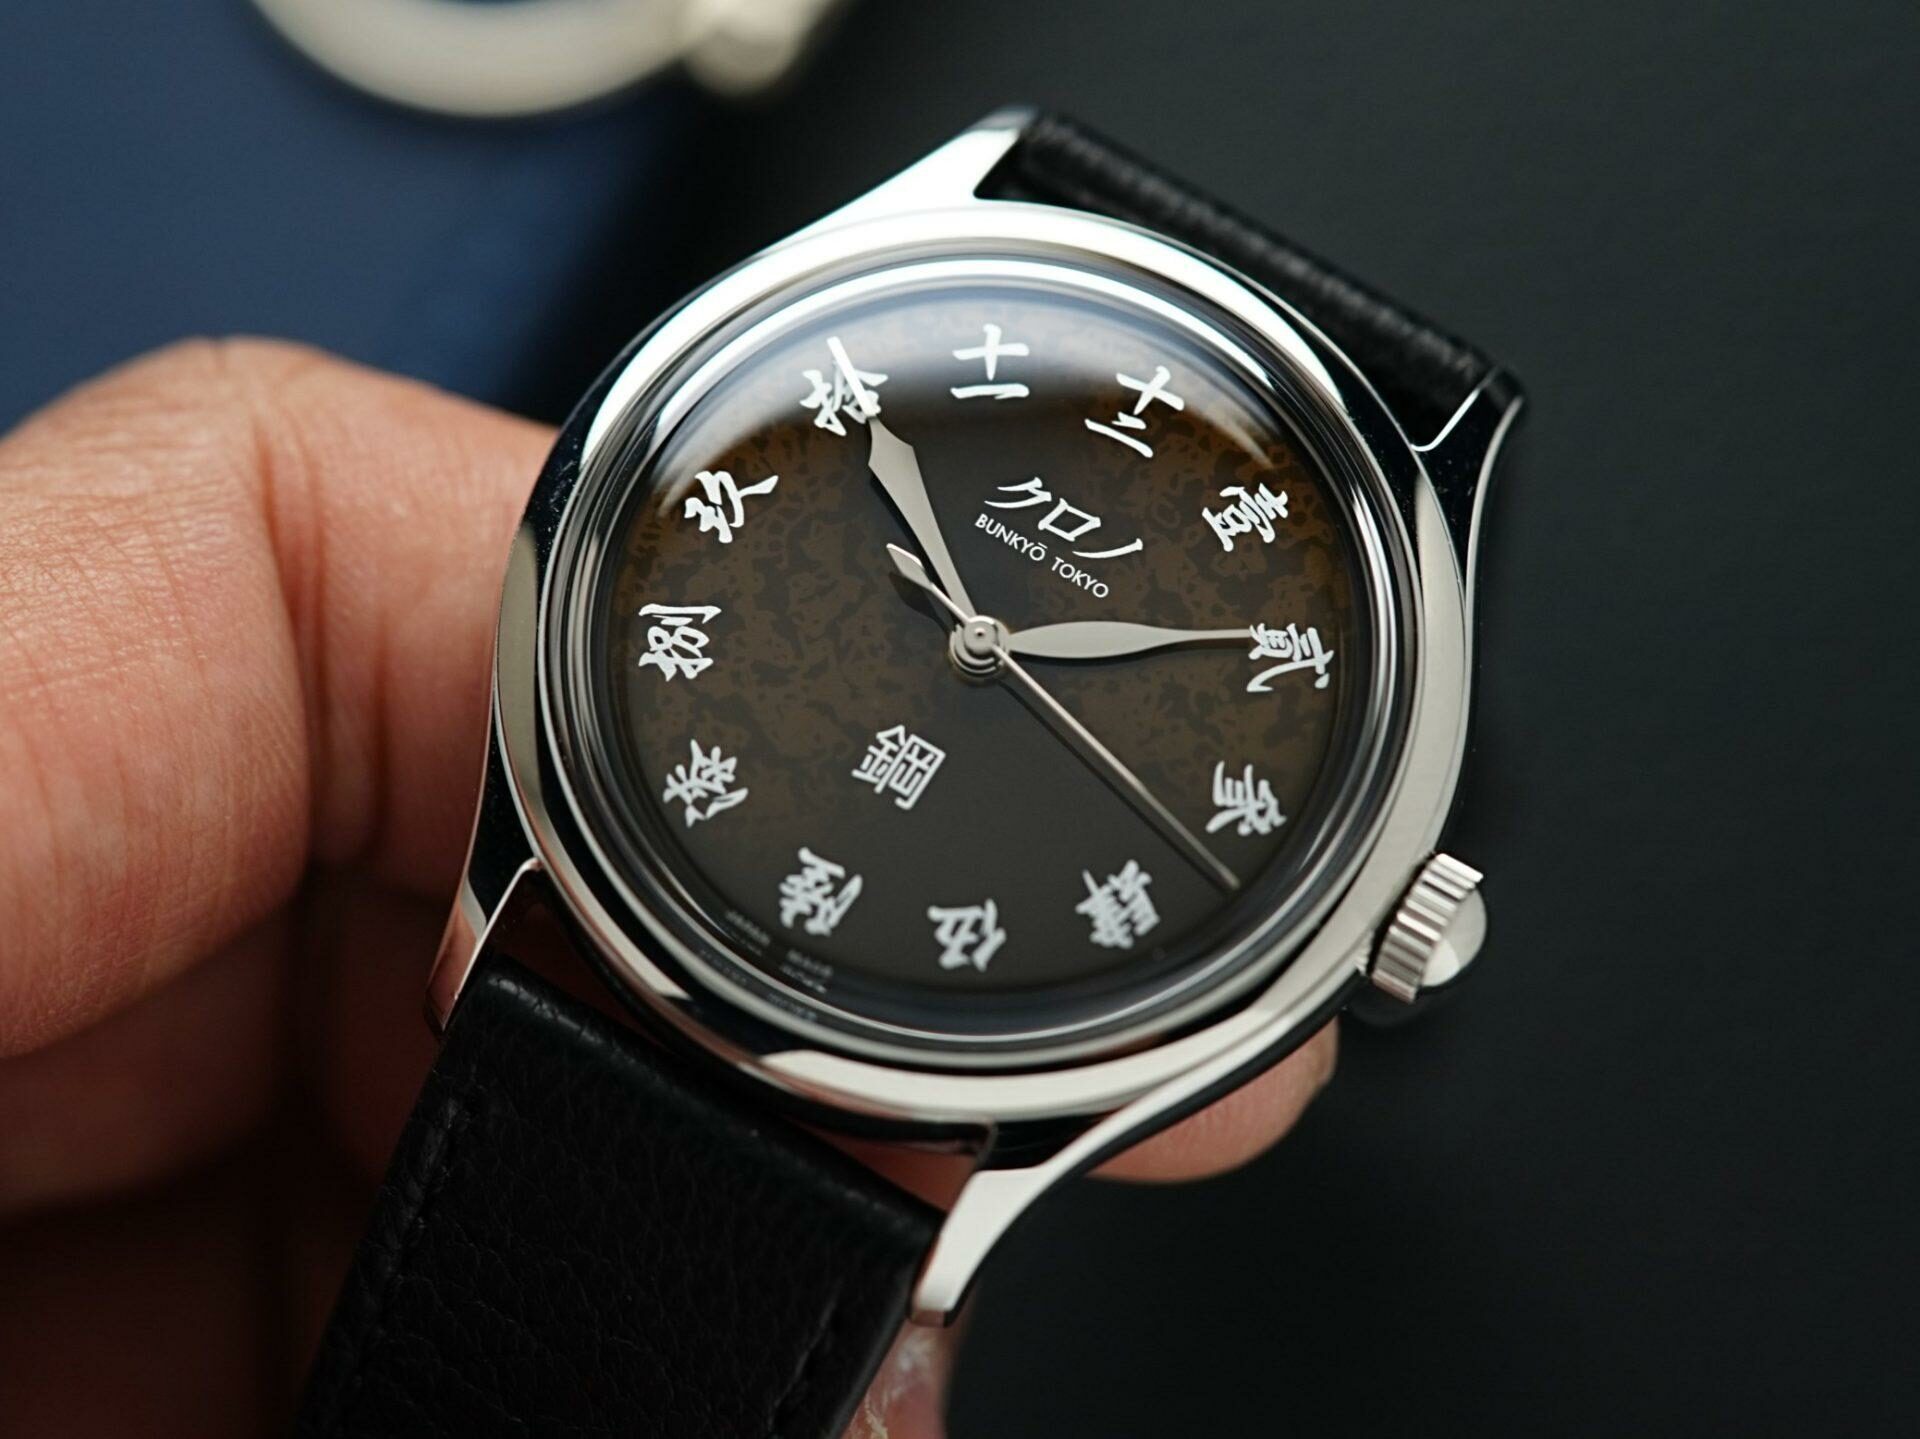 Kurono Tokyo Grand Hagane Limited being held and displayed in hand.